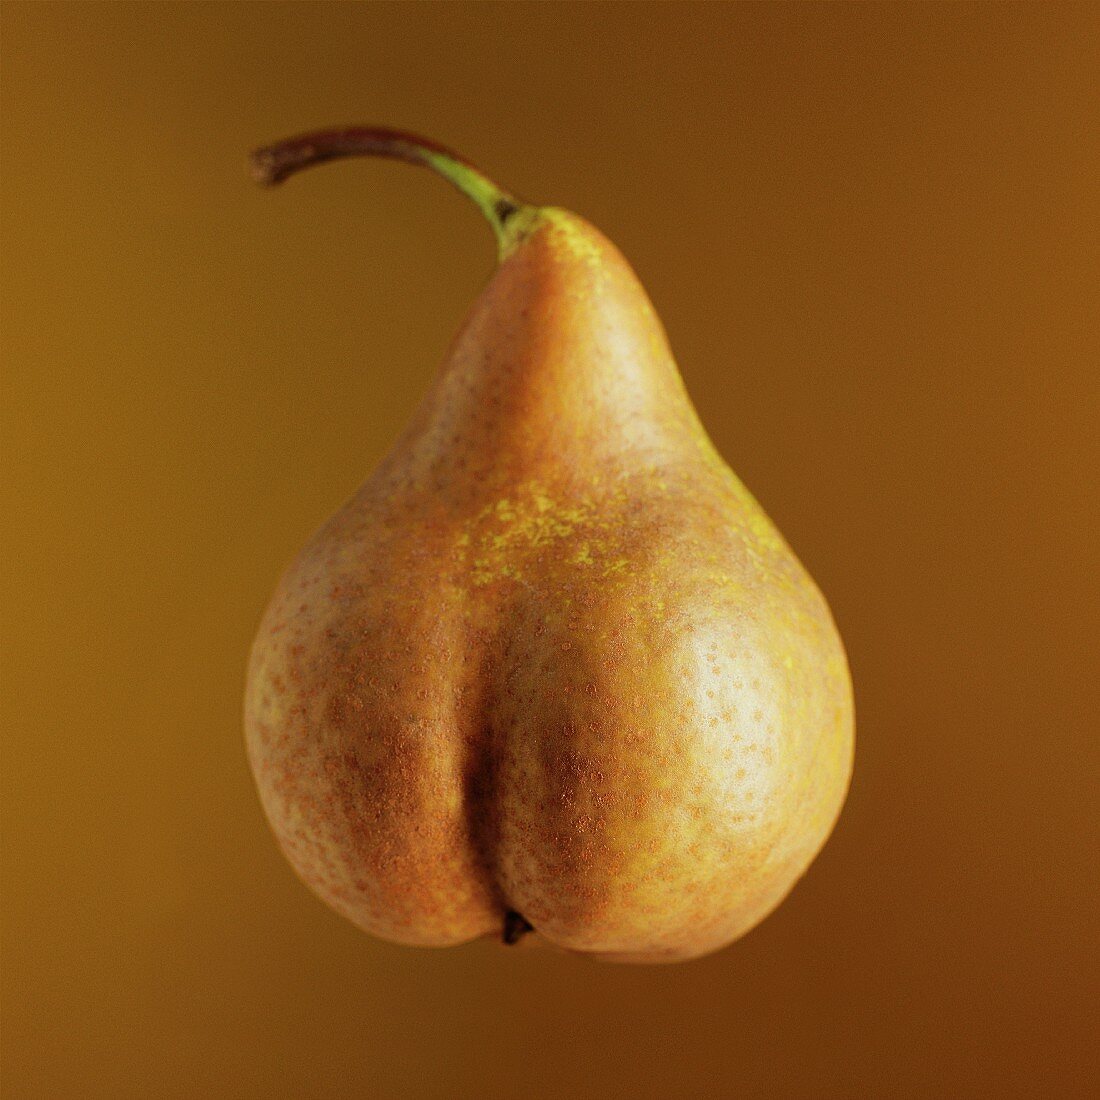 A pear in front of a brown background